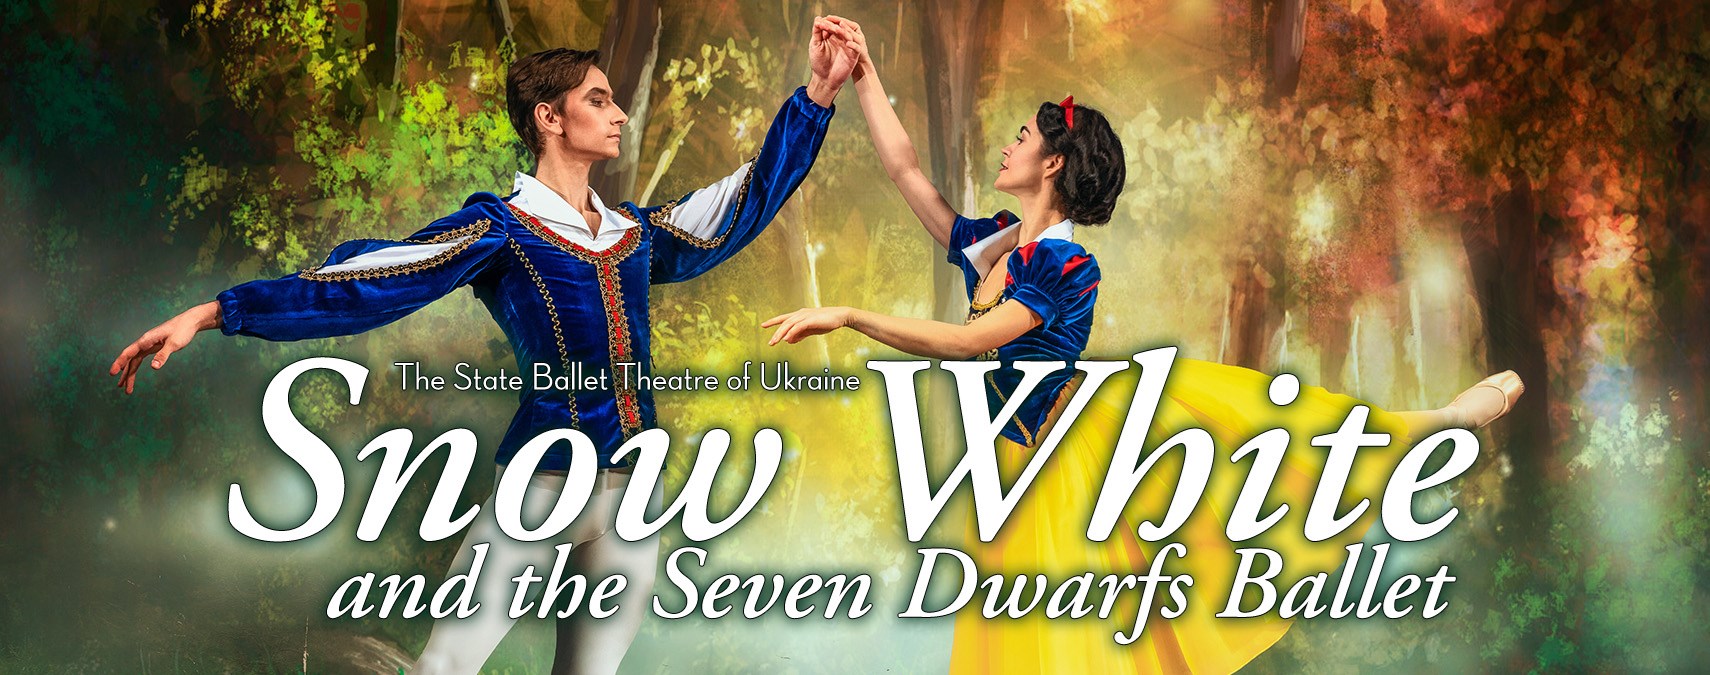 Snow White and the Seven Dwarfs Ballet-Jan 7, 2024 at 3:00pm